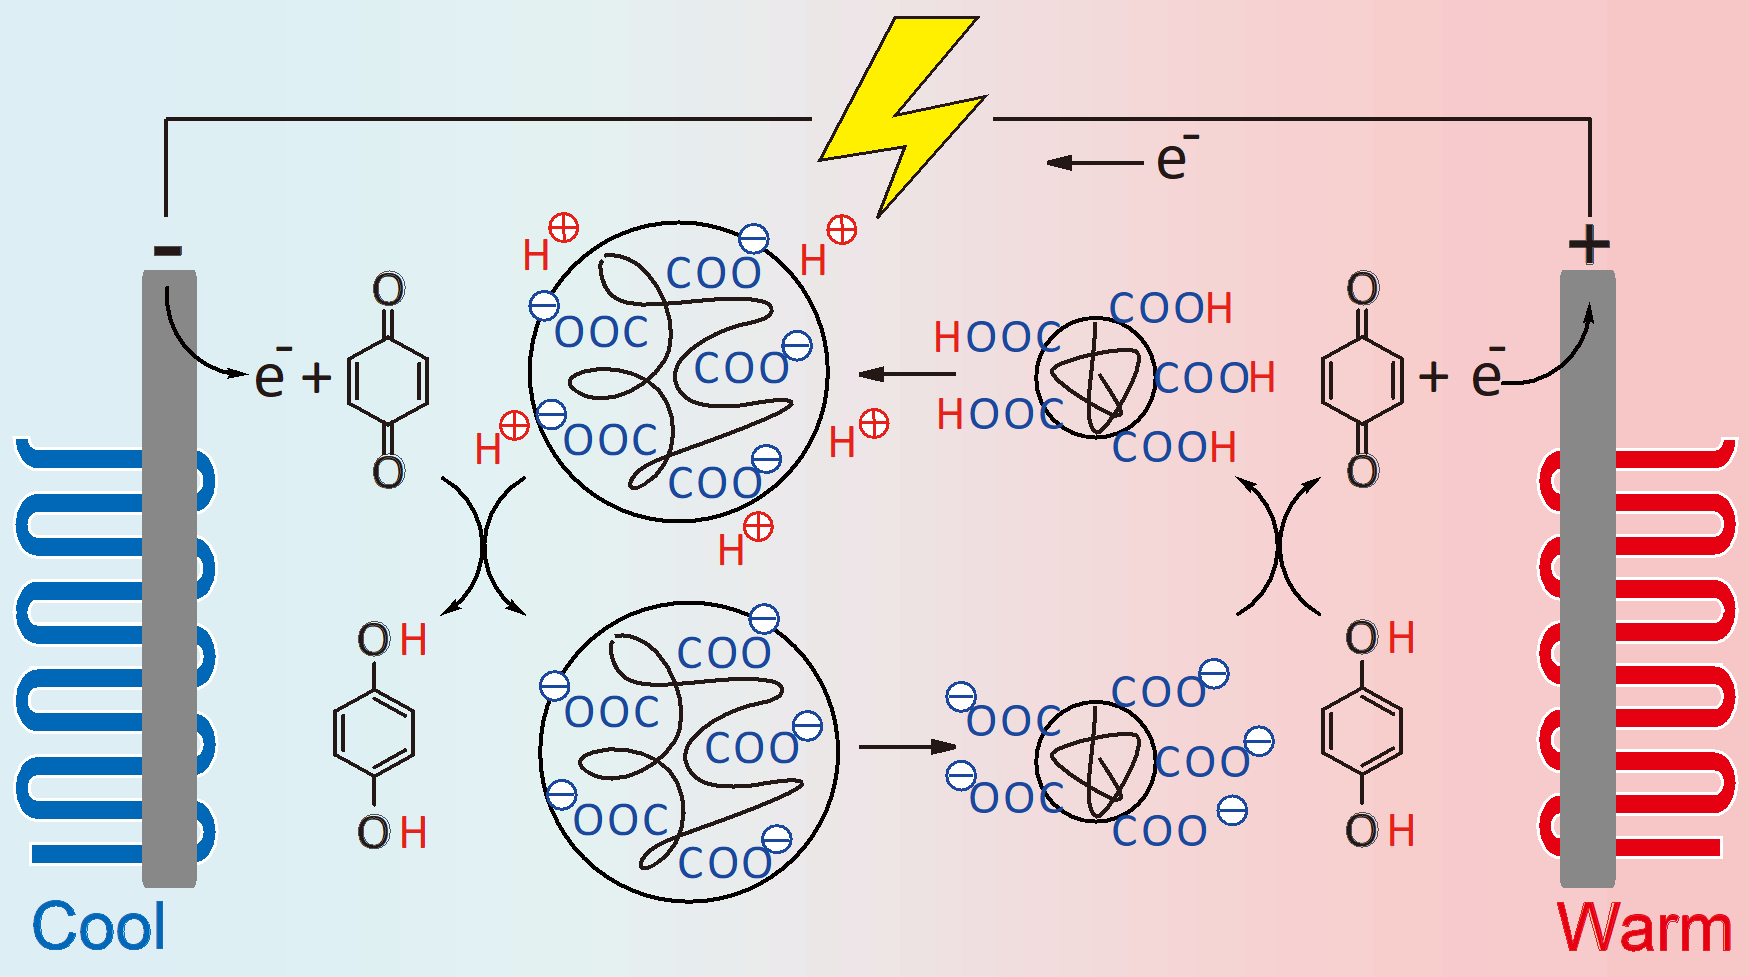 Proposed mechanism for thermocells